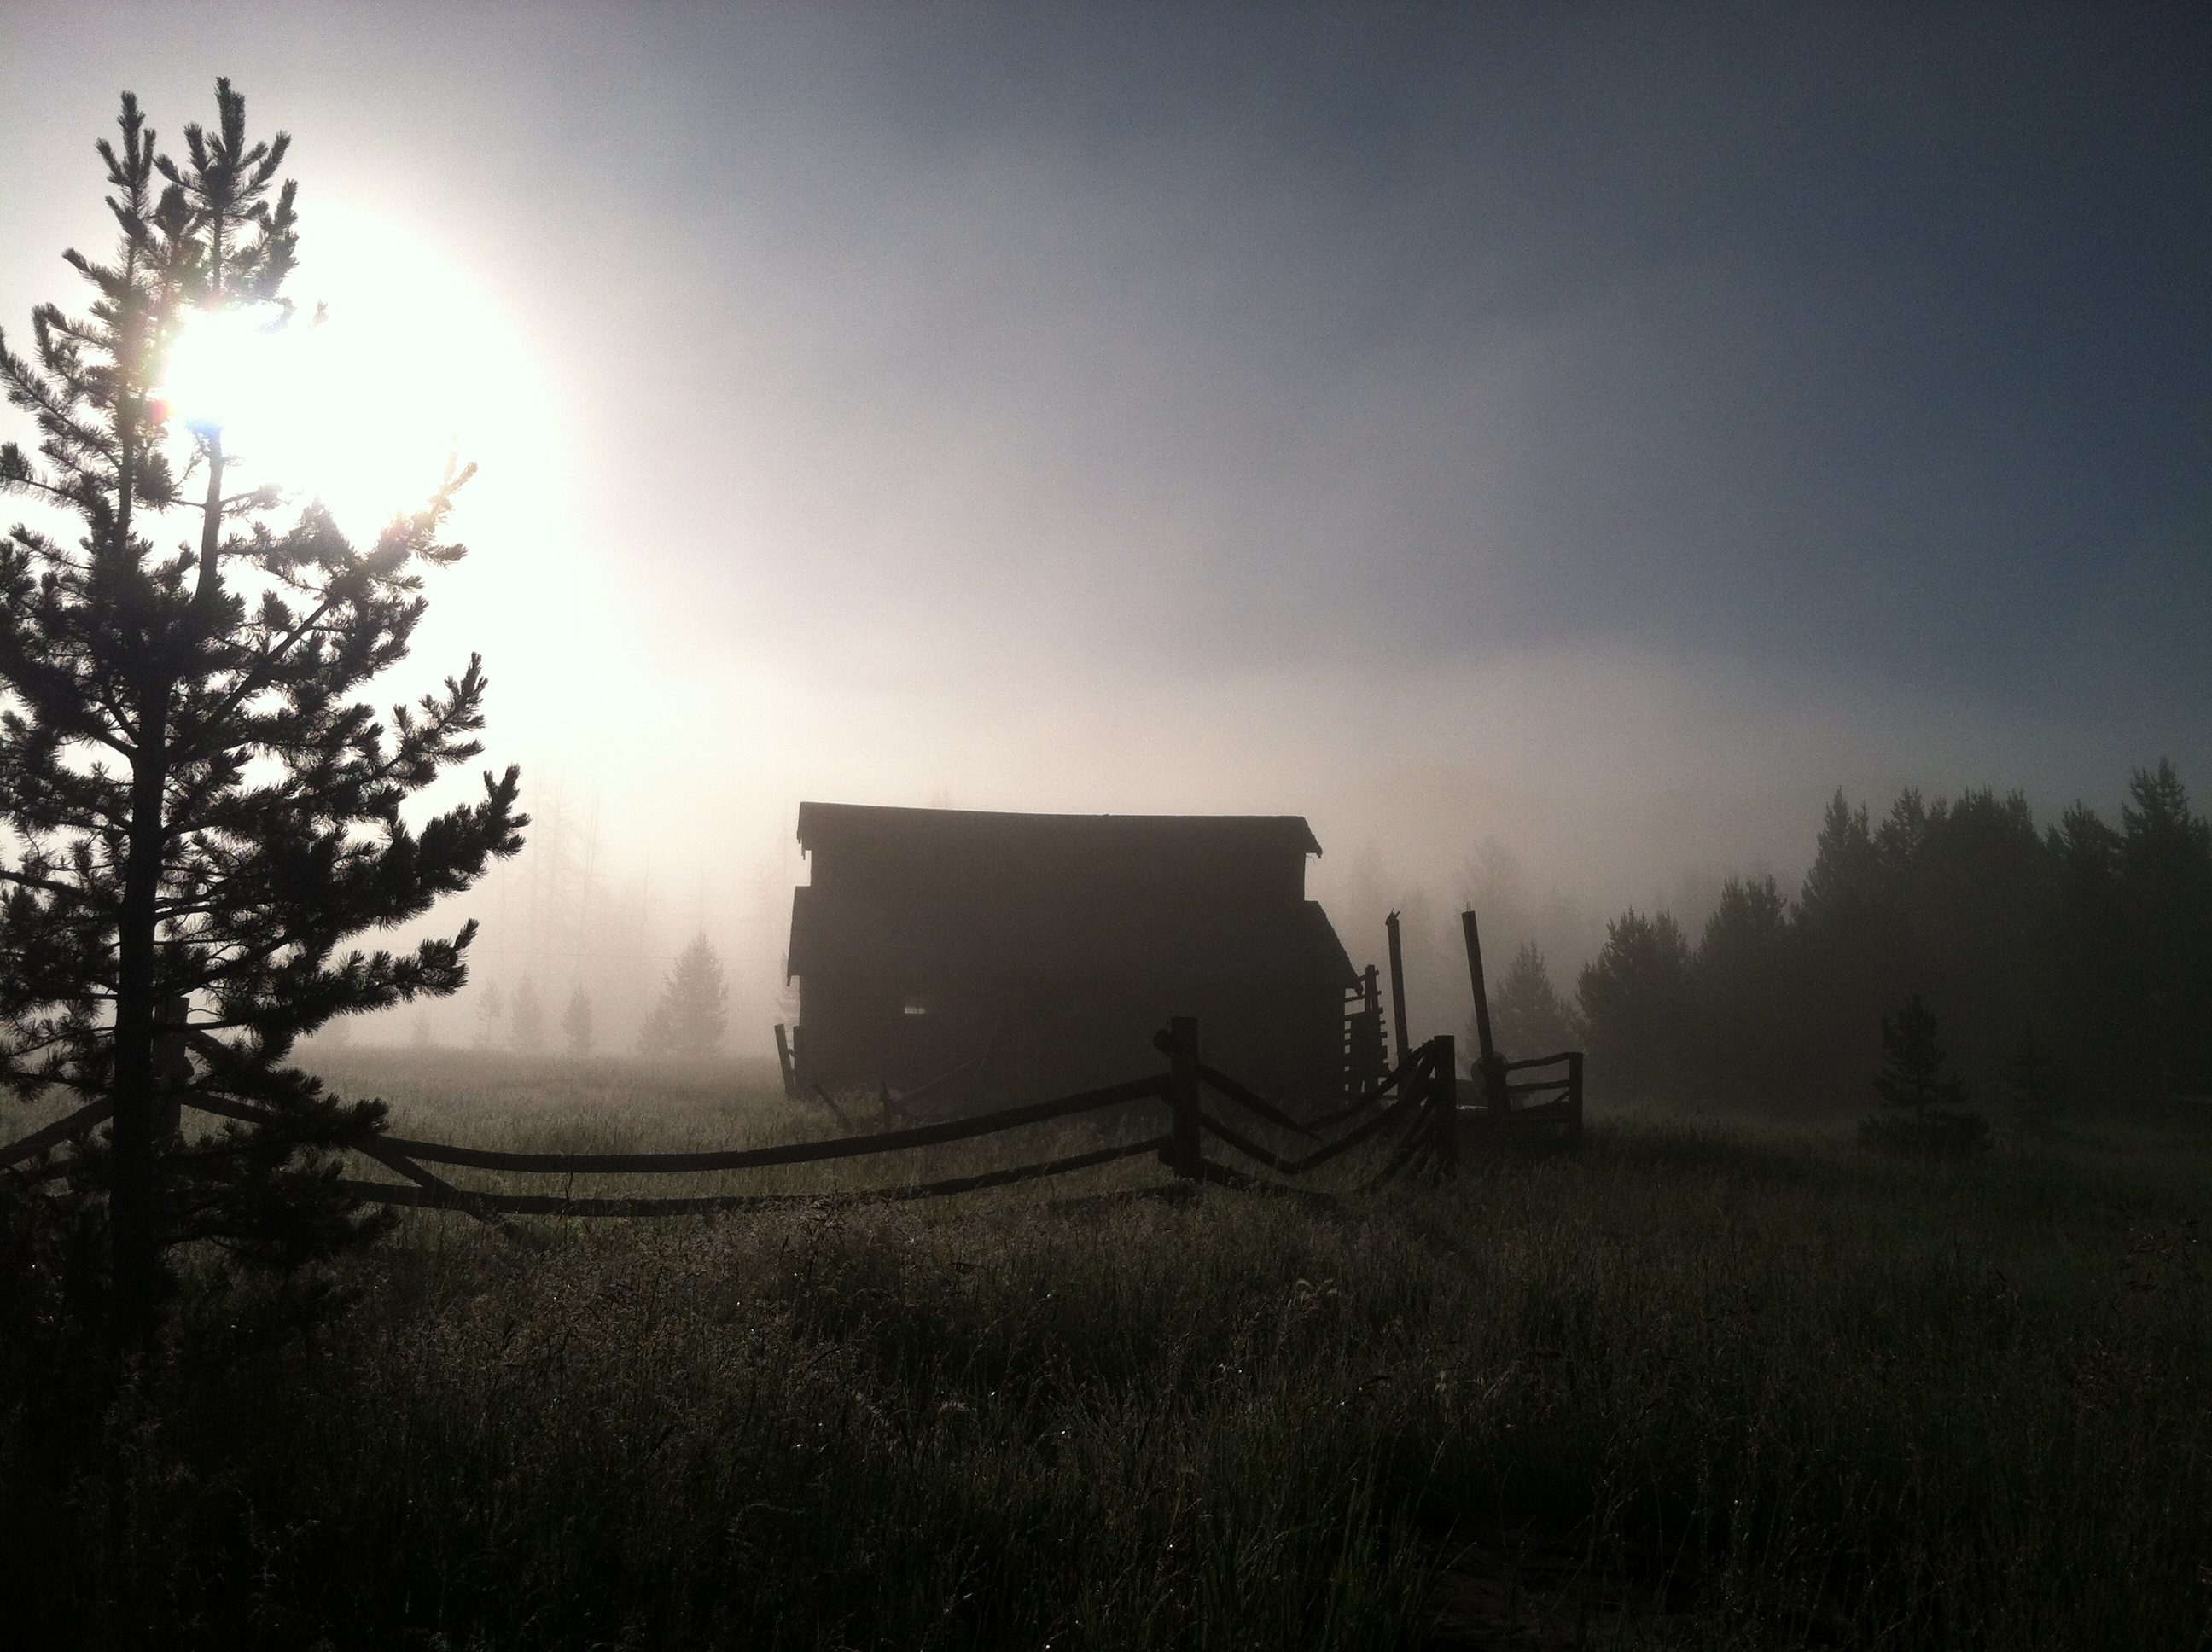 We encircled our worksite through a meadow of dew frosted grasses, an elusive rainbow arched over our dirt path allowing us to peer at the historic Little Buckaroo Barn it its natural state, so primitive, so isolate, and so hauntingly beautiful.